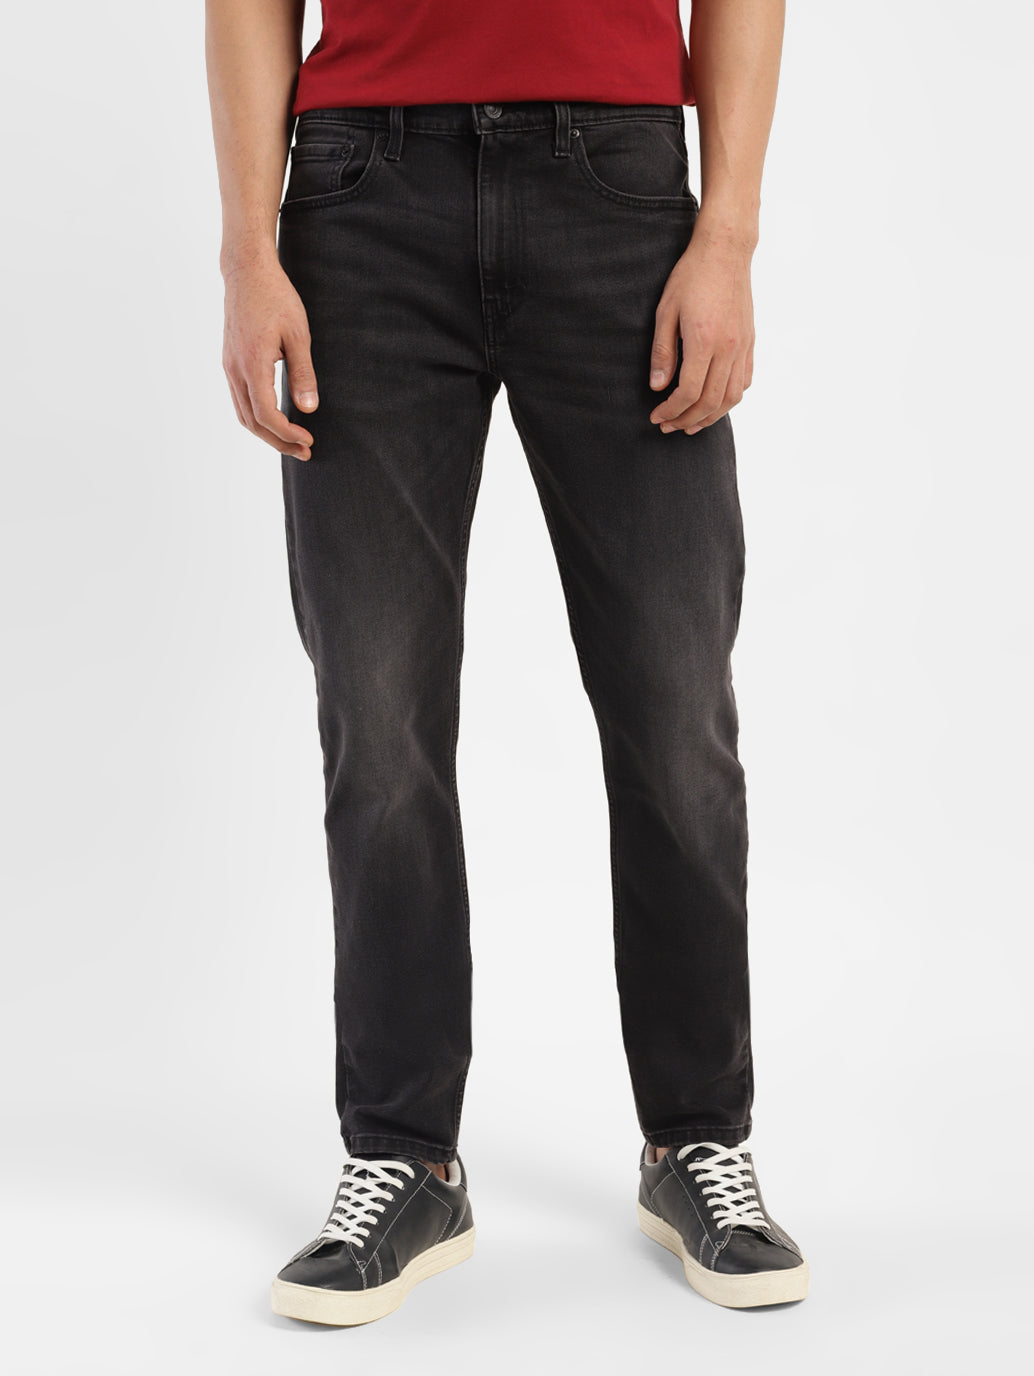 Buy Raw Black Power Stretch Slim Fit Jeans Online In India